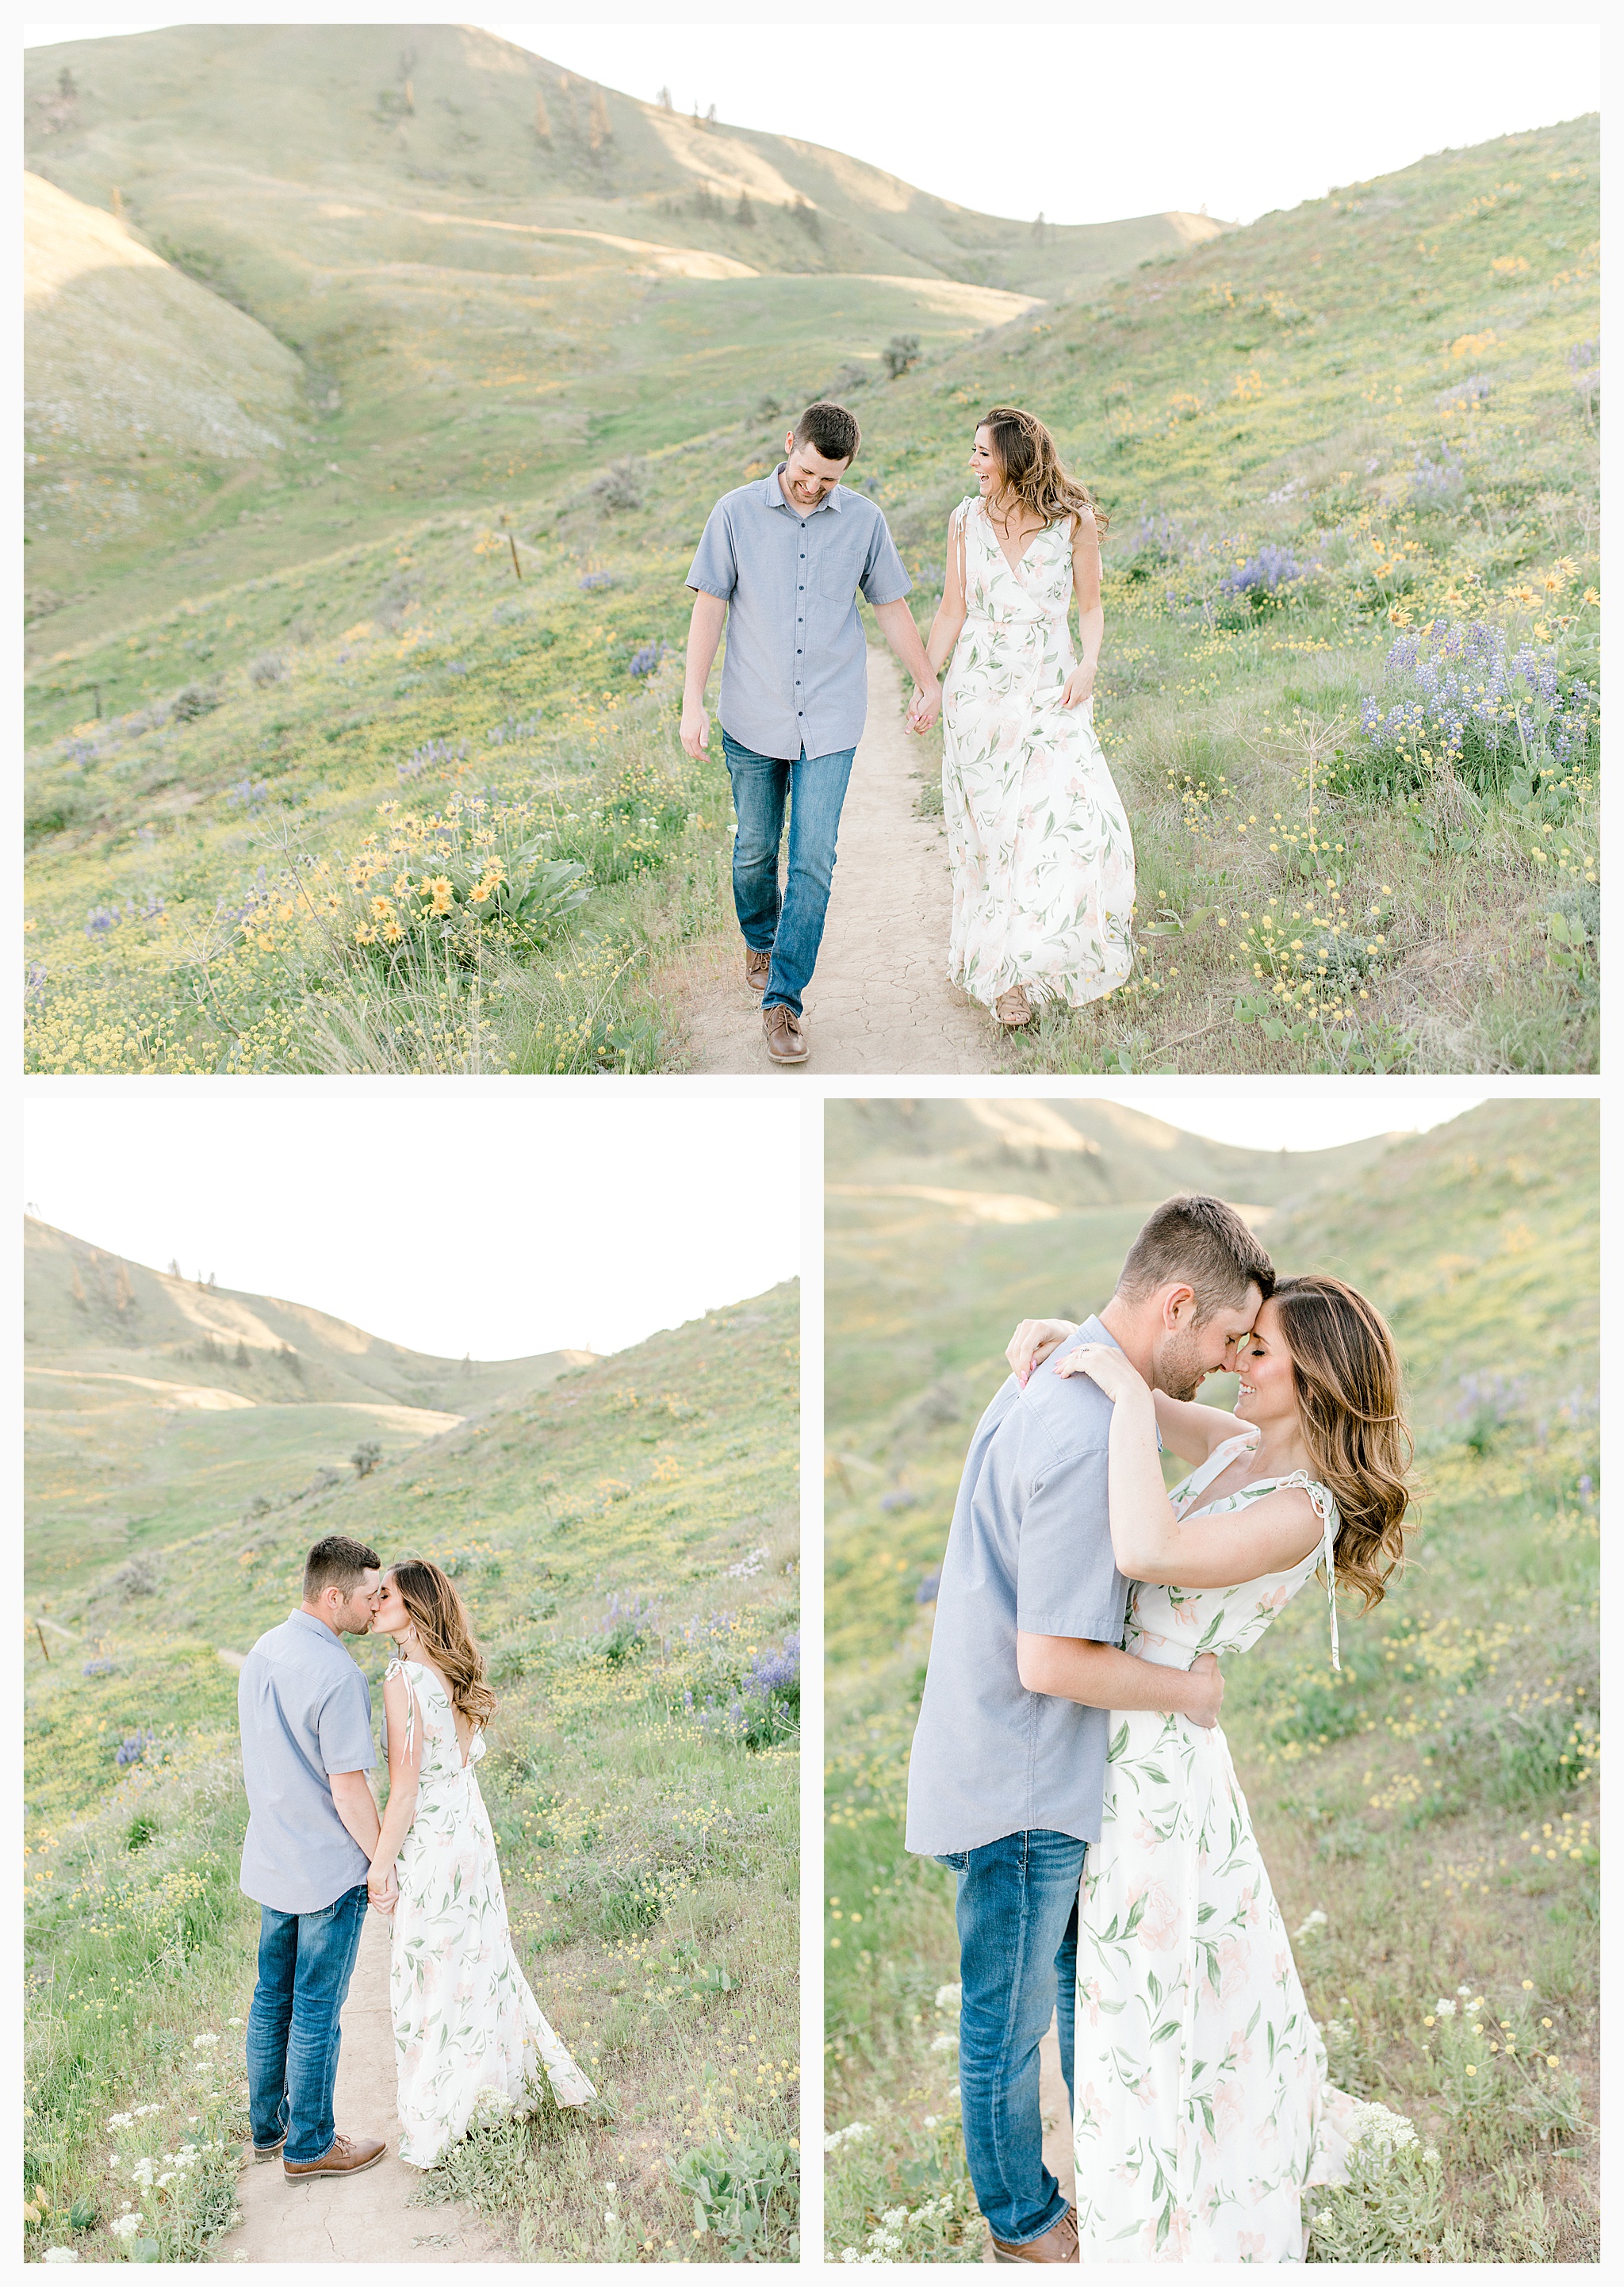 Engagement session amongst the wildflowers in Wenatchee, Washington | Engagement Session Outfit Inspiration for Wedding Photography with Emma Rose Company | Light and Airy PNW Photographer, Seattle Bride_0013.jpg